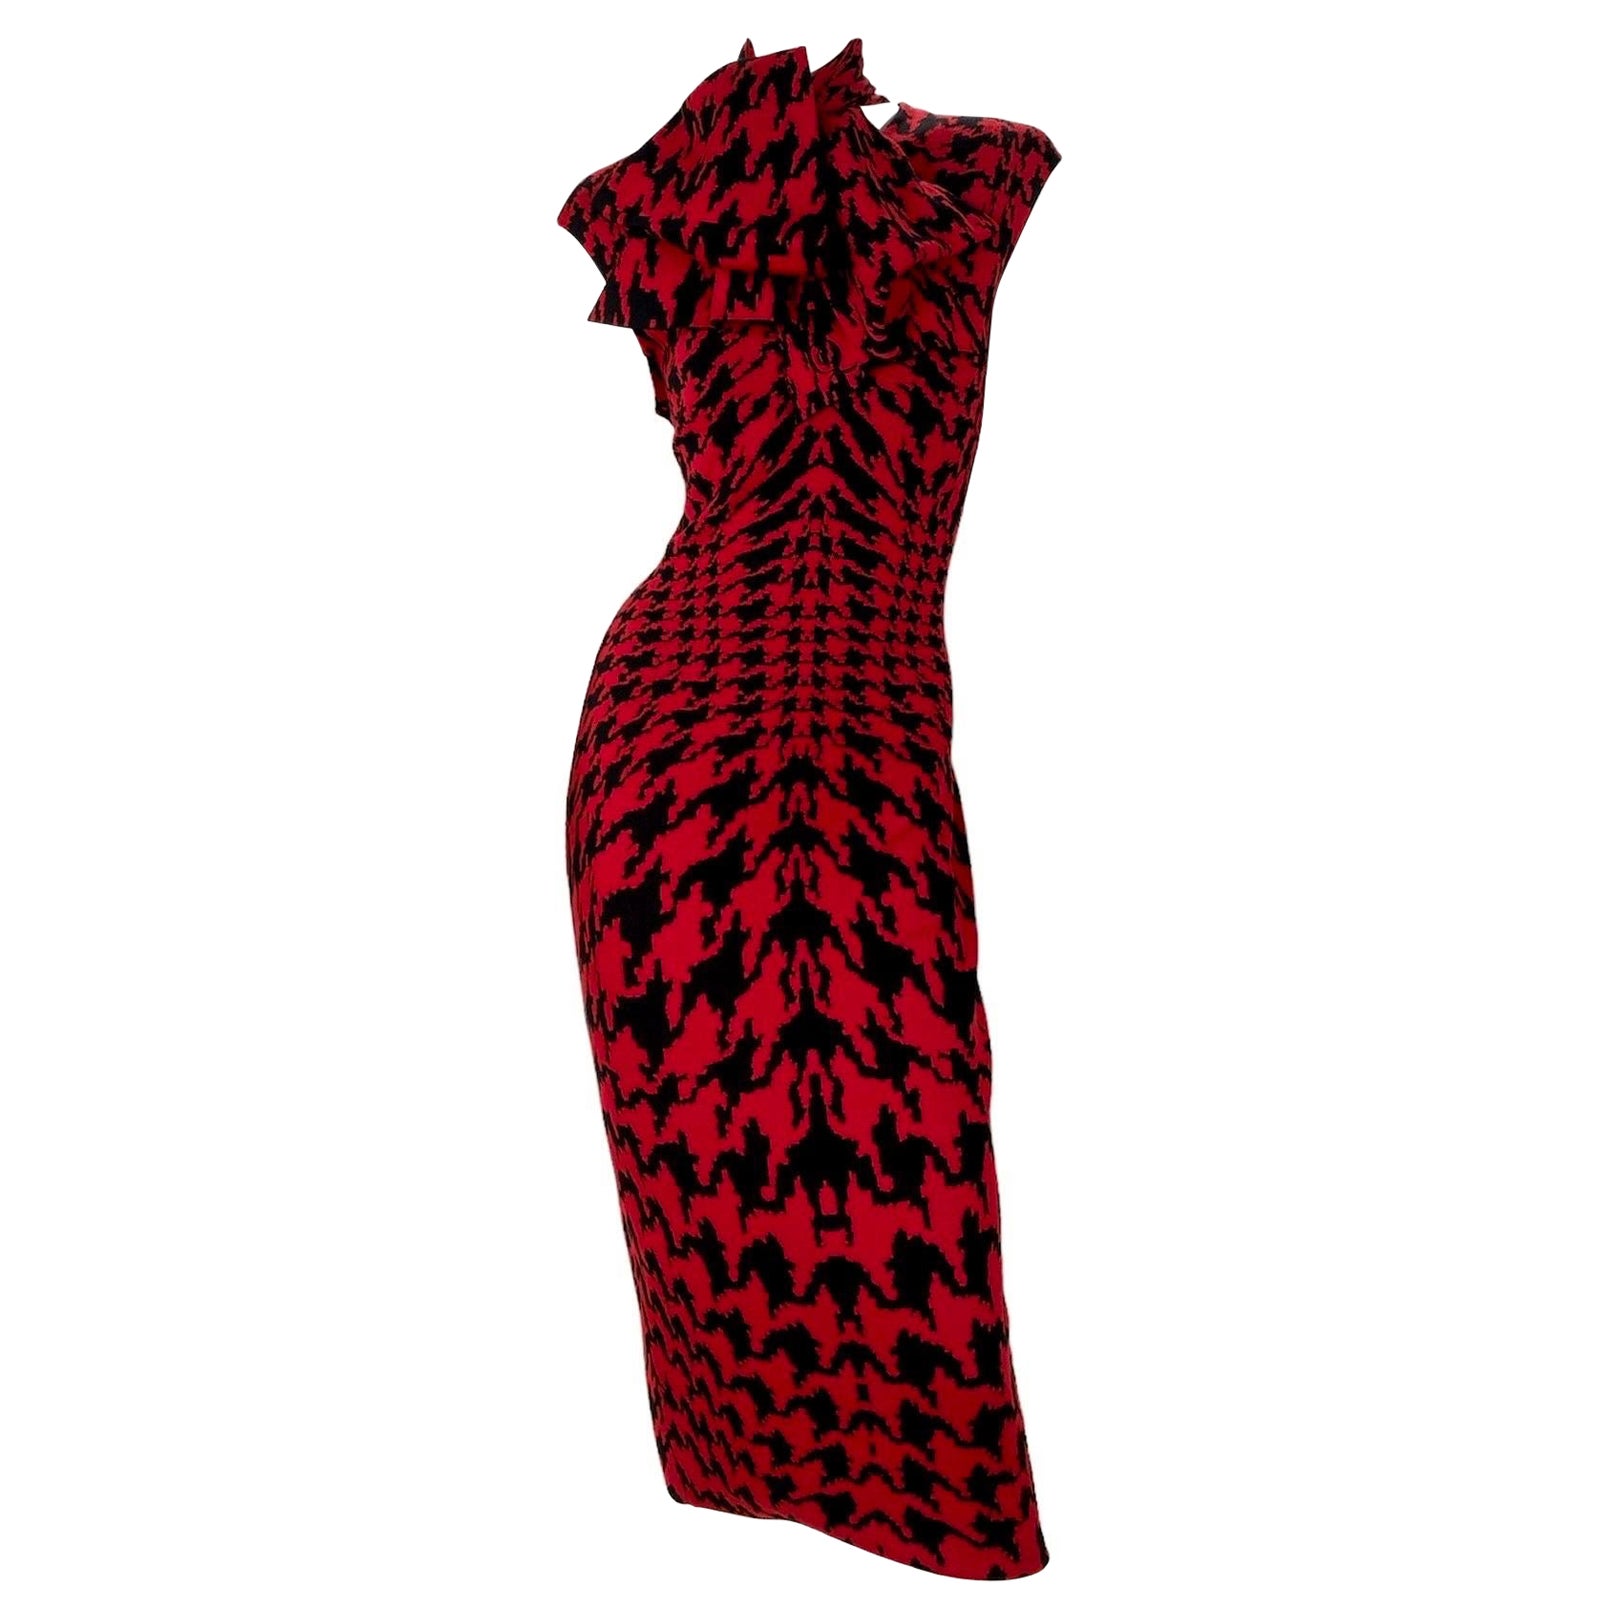 F/W 2009 Iconic Alexander Mcqueen houndstooth print knit dress  For Sale